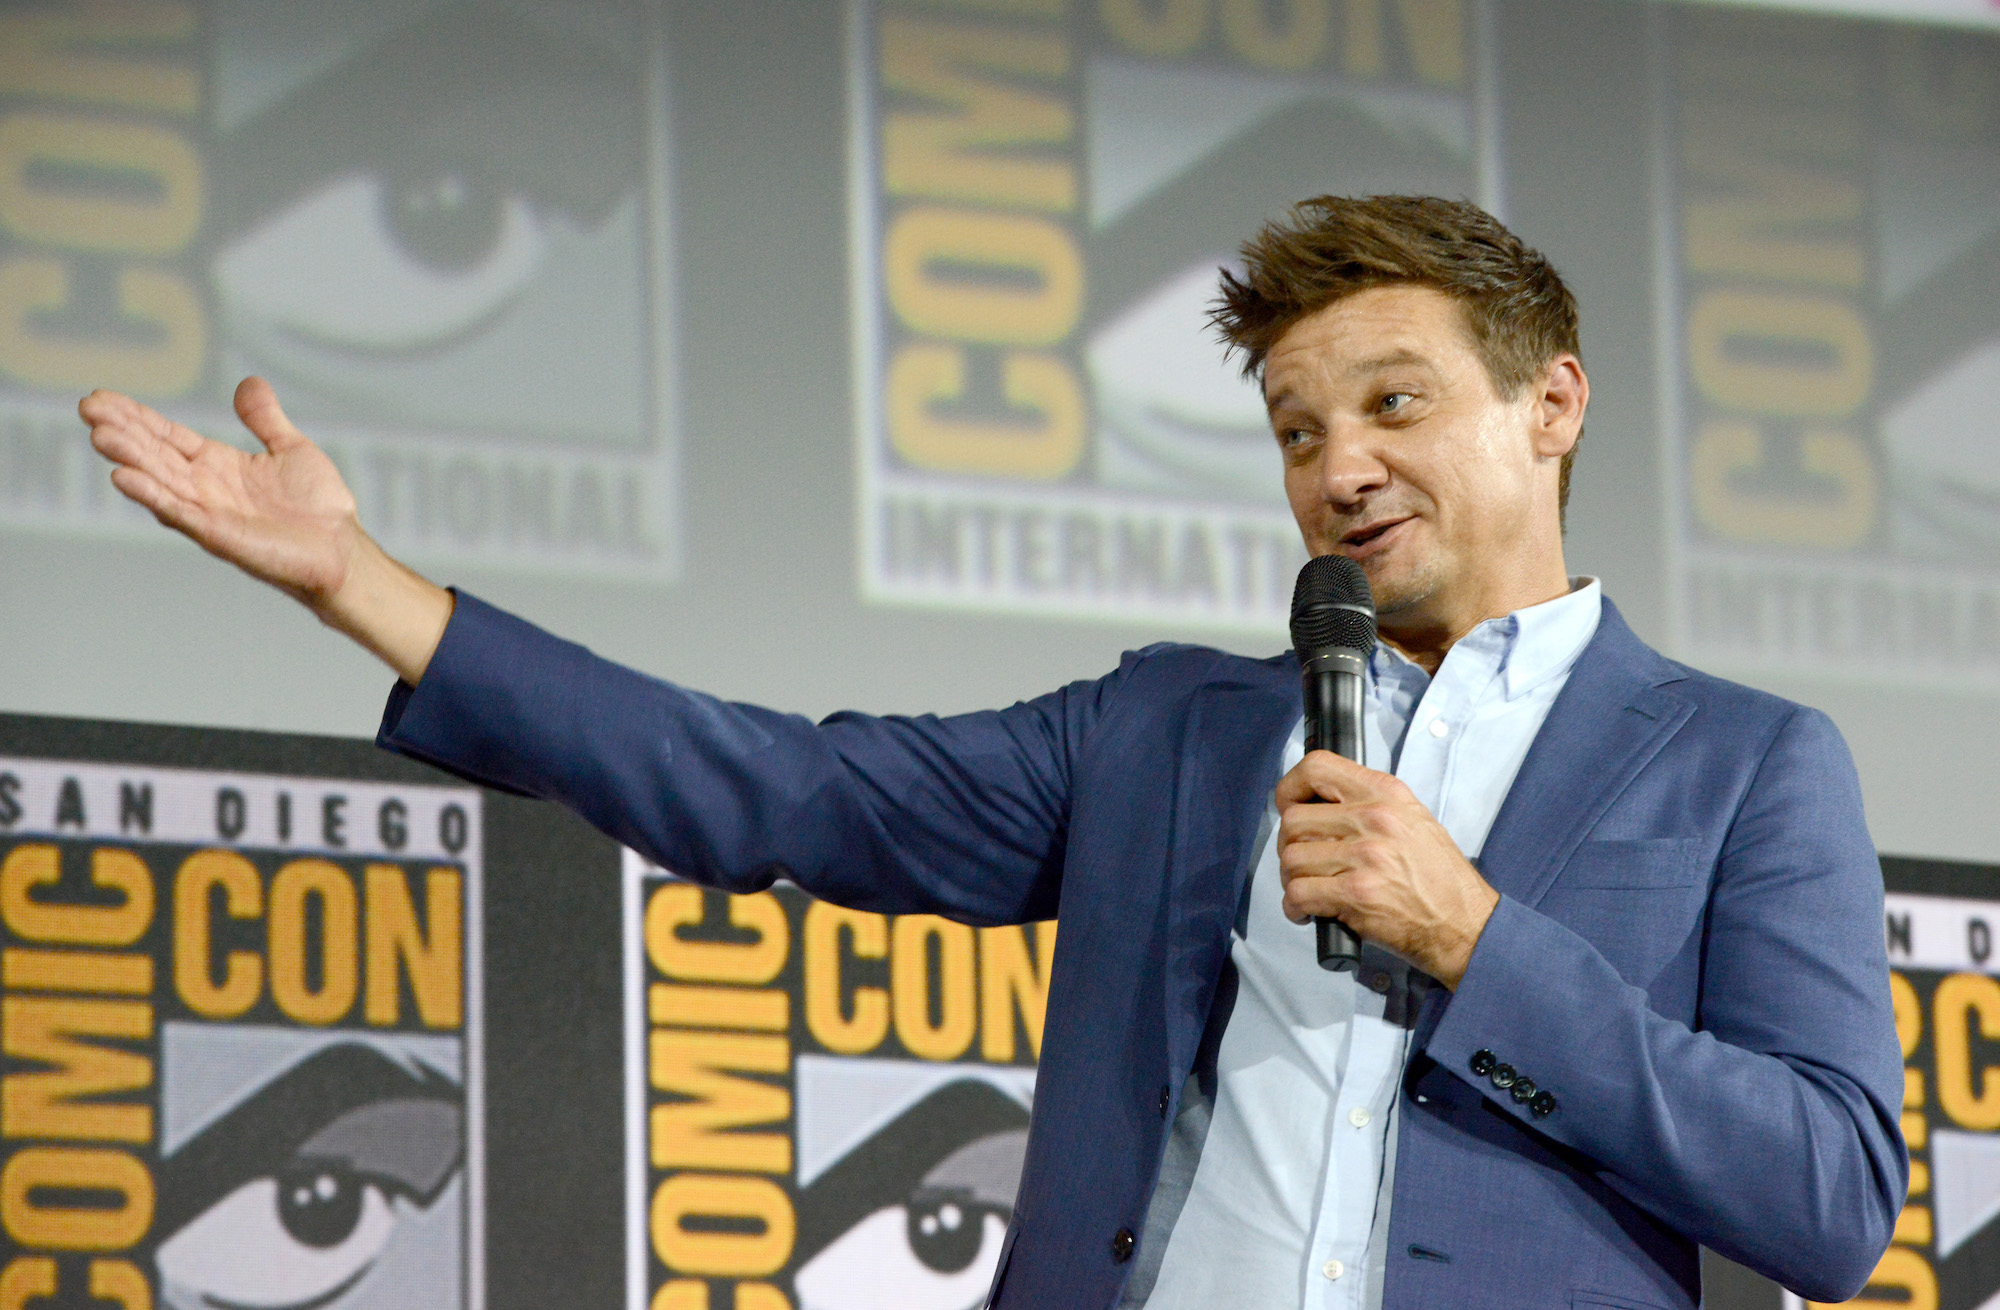 Jeremy Renner’s Arms Help Fans Identify Which MCU Movie This Photo Came From